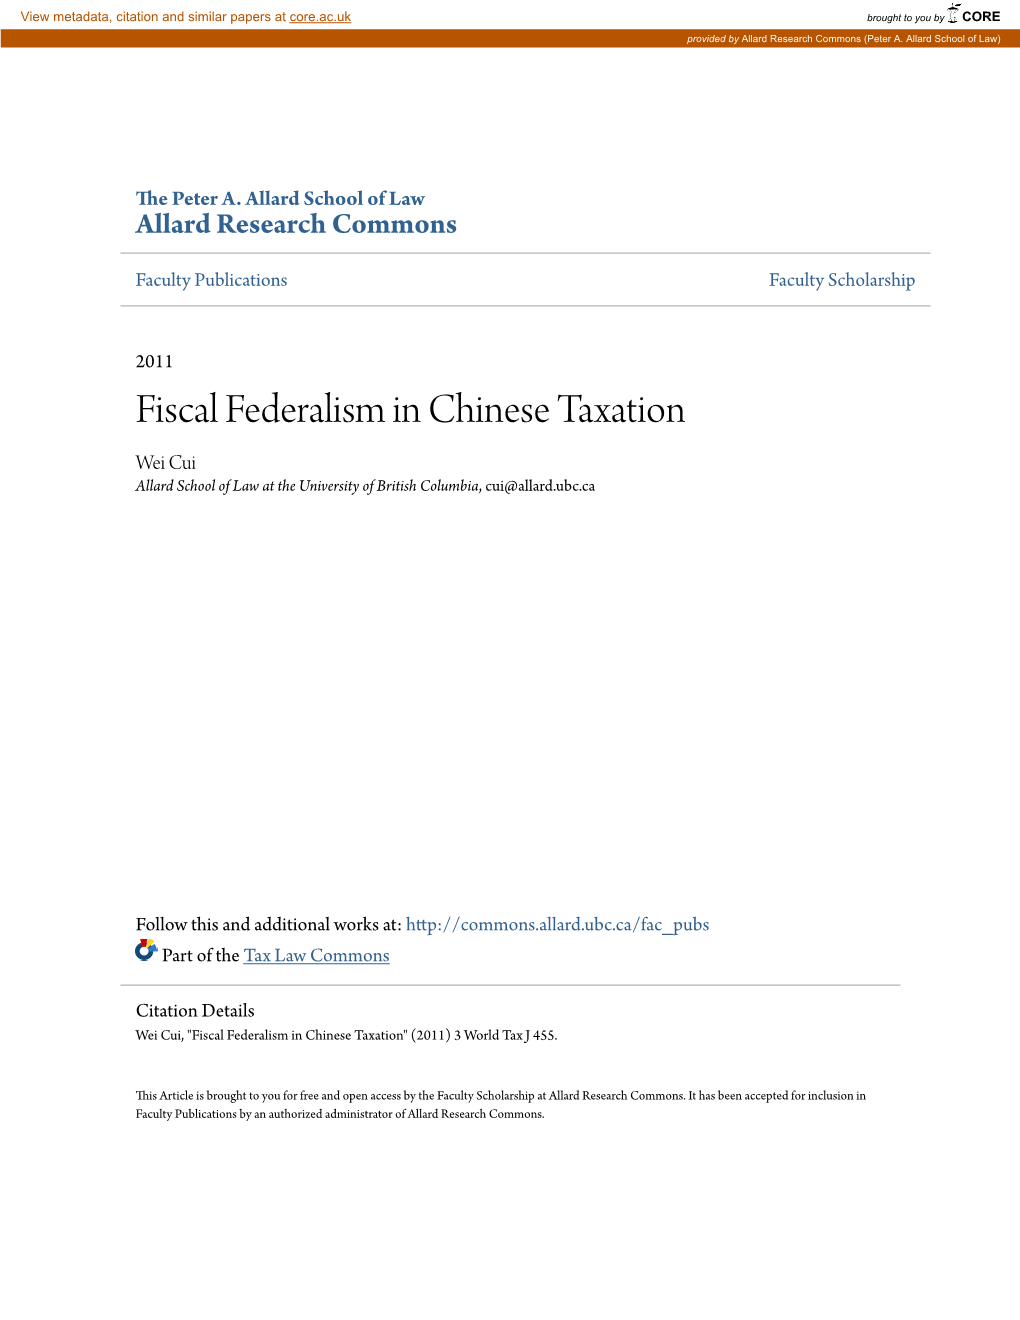 Fiscal Federalism in Chinese Taxation Wei Cui Allard School of Law at the University of British Columbia, Cui@Allard.Ubc.Ca